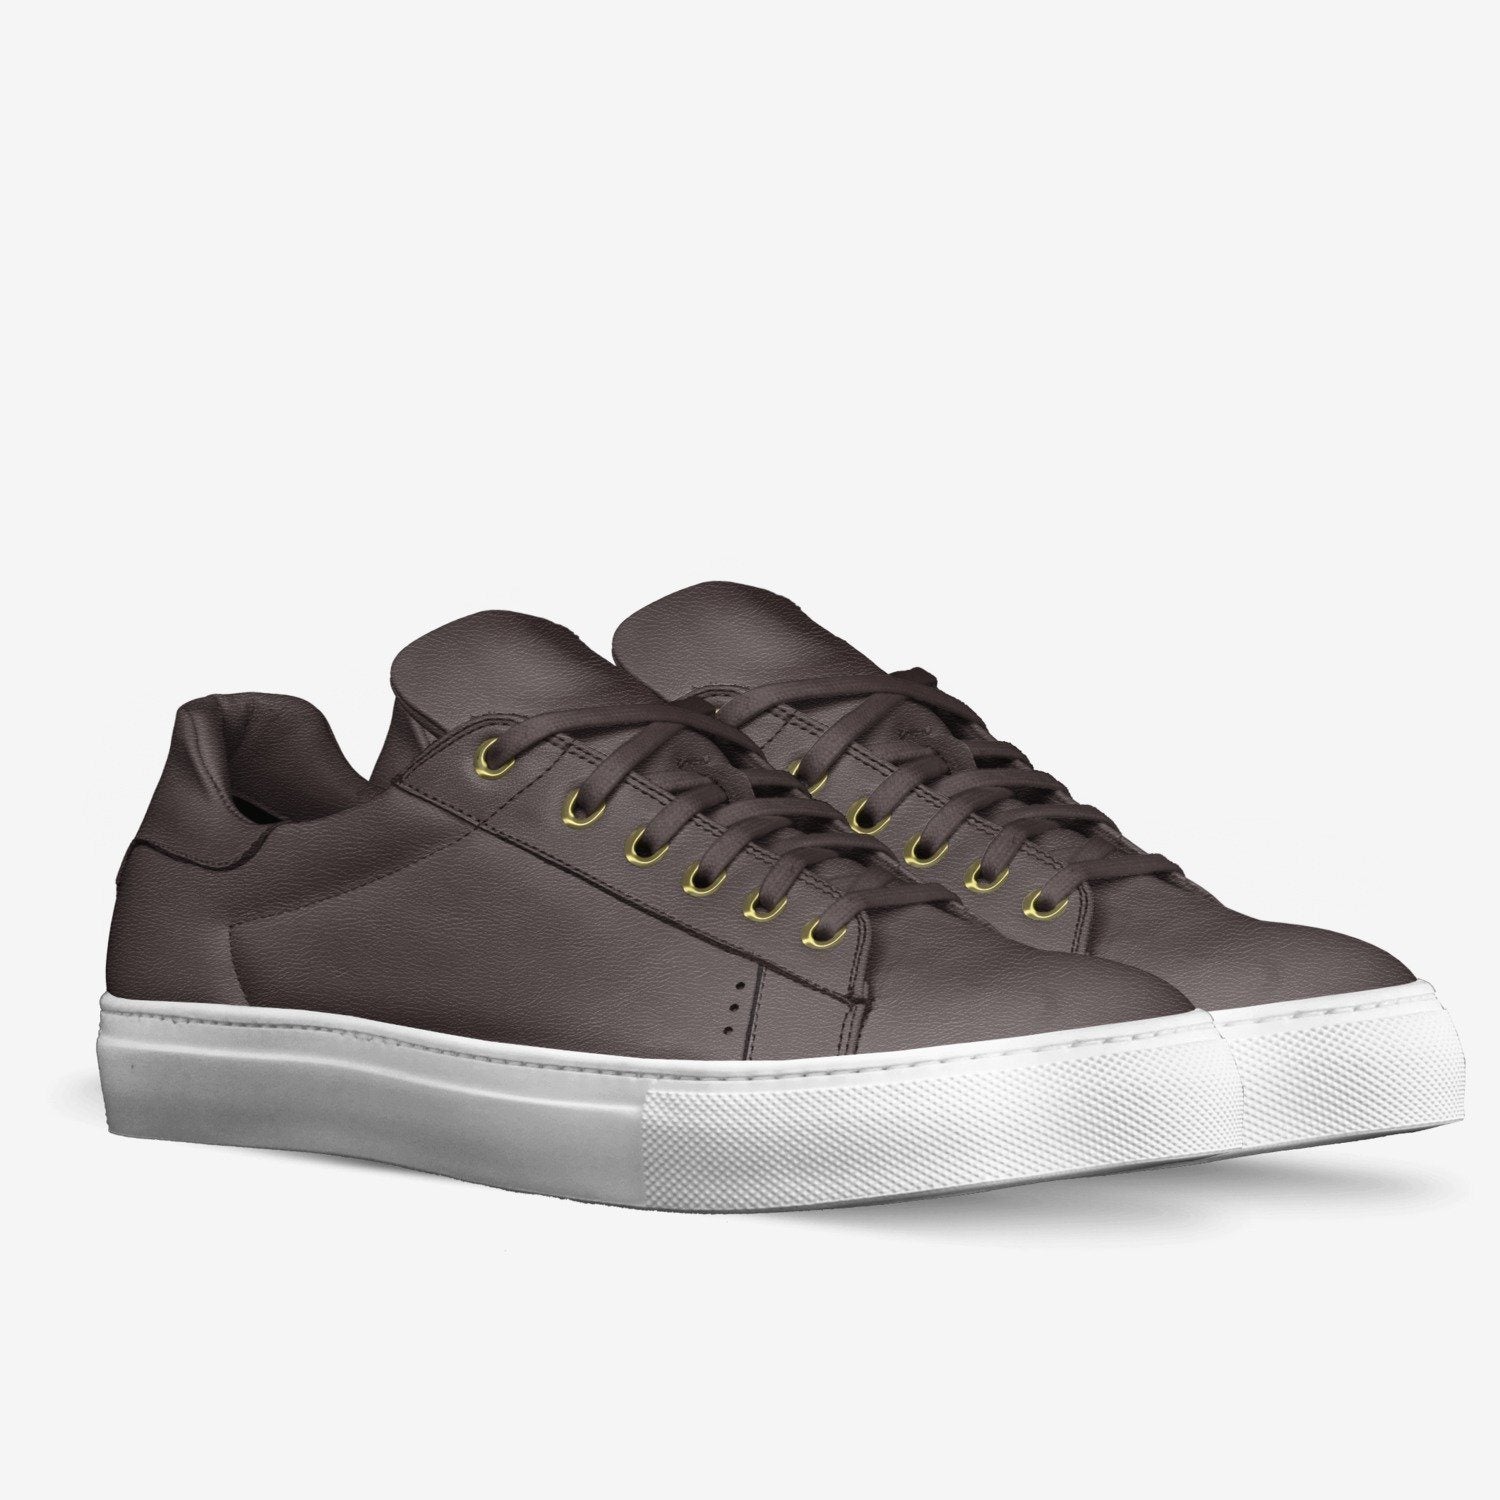 LORENZO LEATHER SNEAKERS IN TOBACCO | Poor Little Rich Boy Clothing